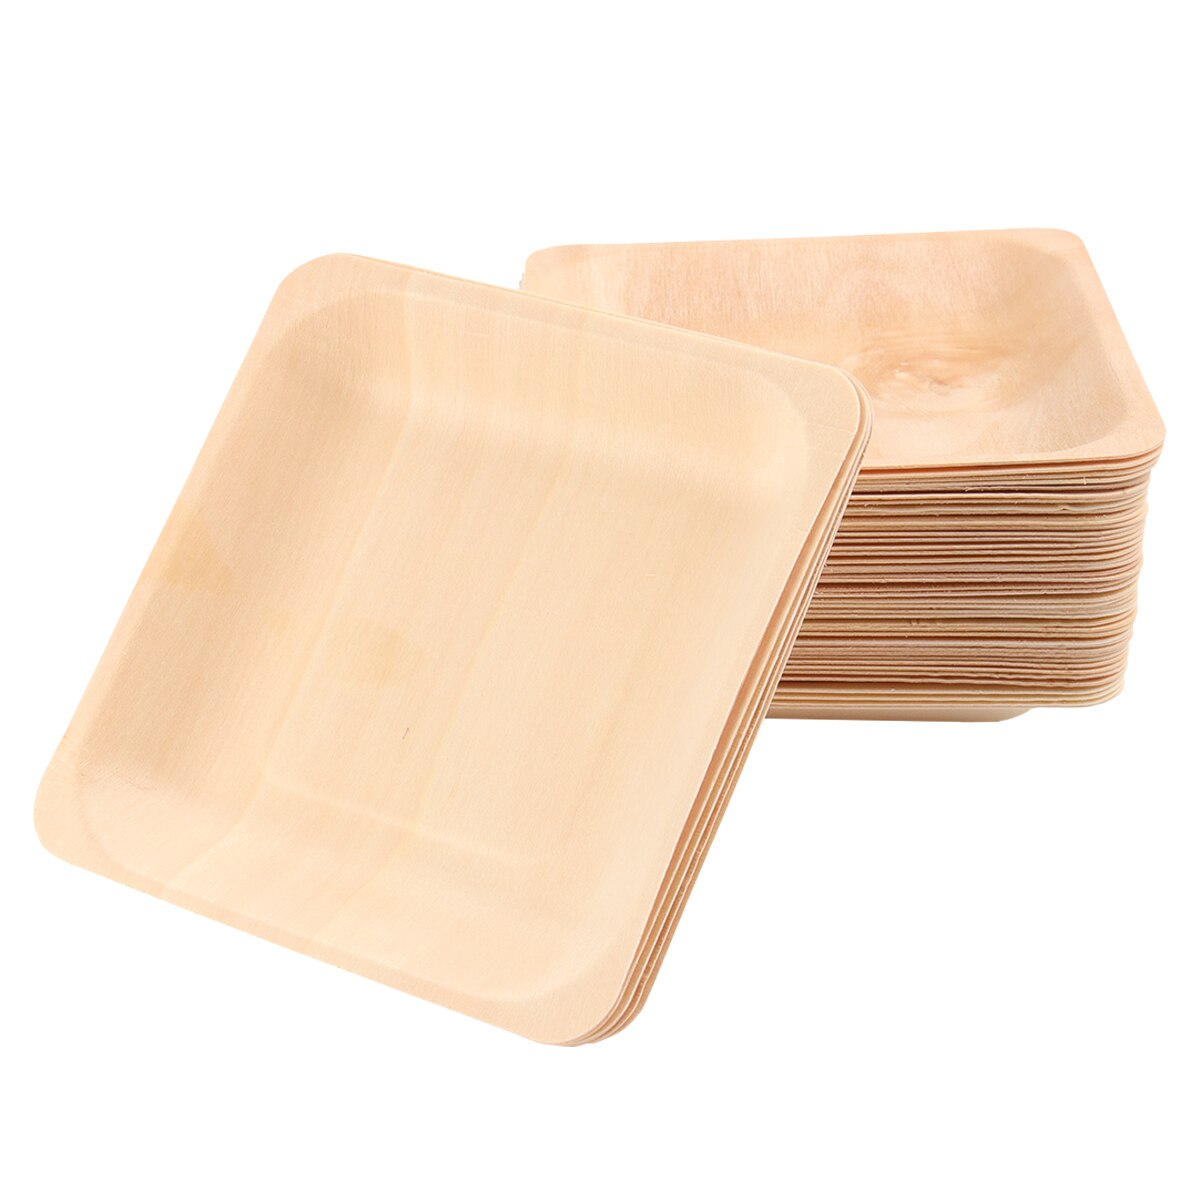 50PCS Disposable Wooden Plate Square Tableware Party Plates for Wedding Restaurant Picnic Birthday